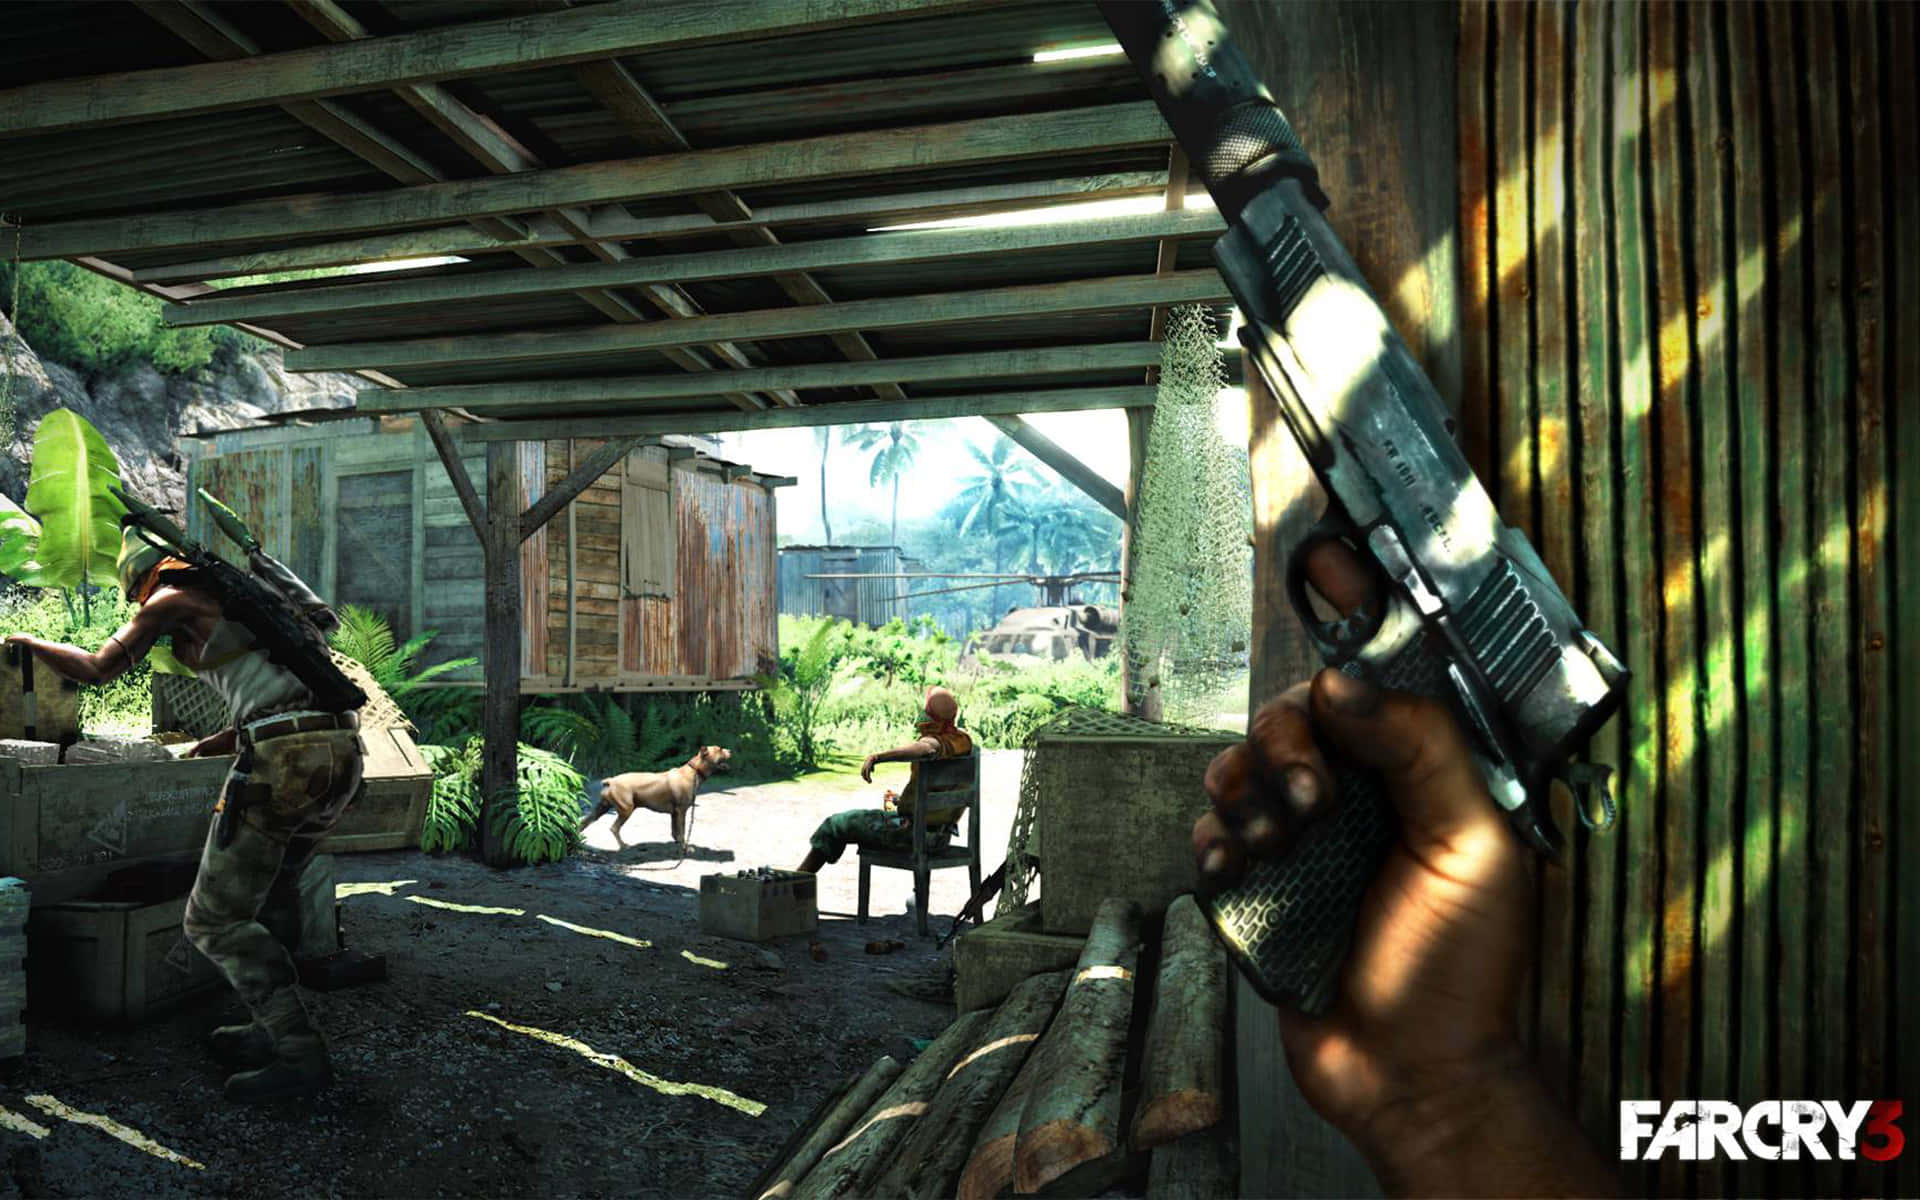 Explore the dangers of an island paradise in Far Cry 3